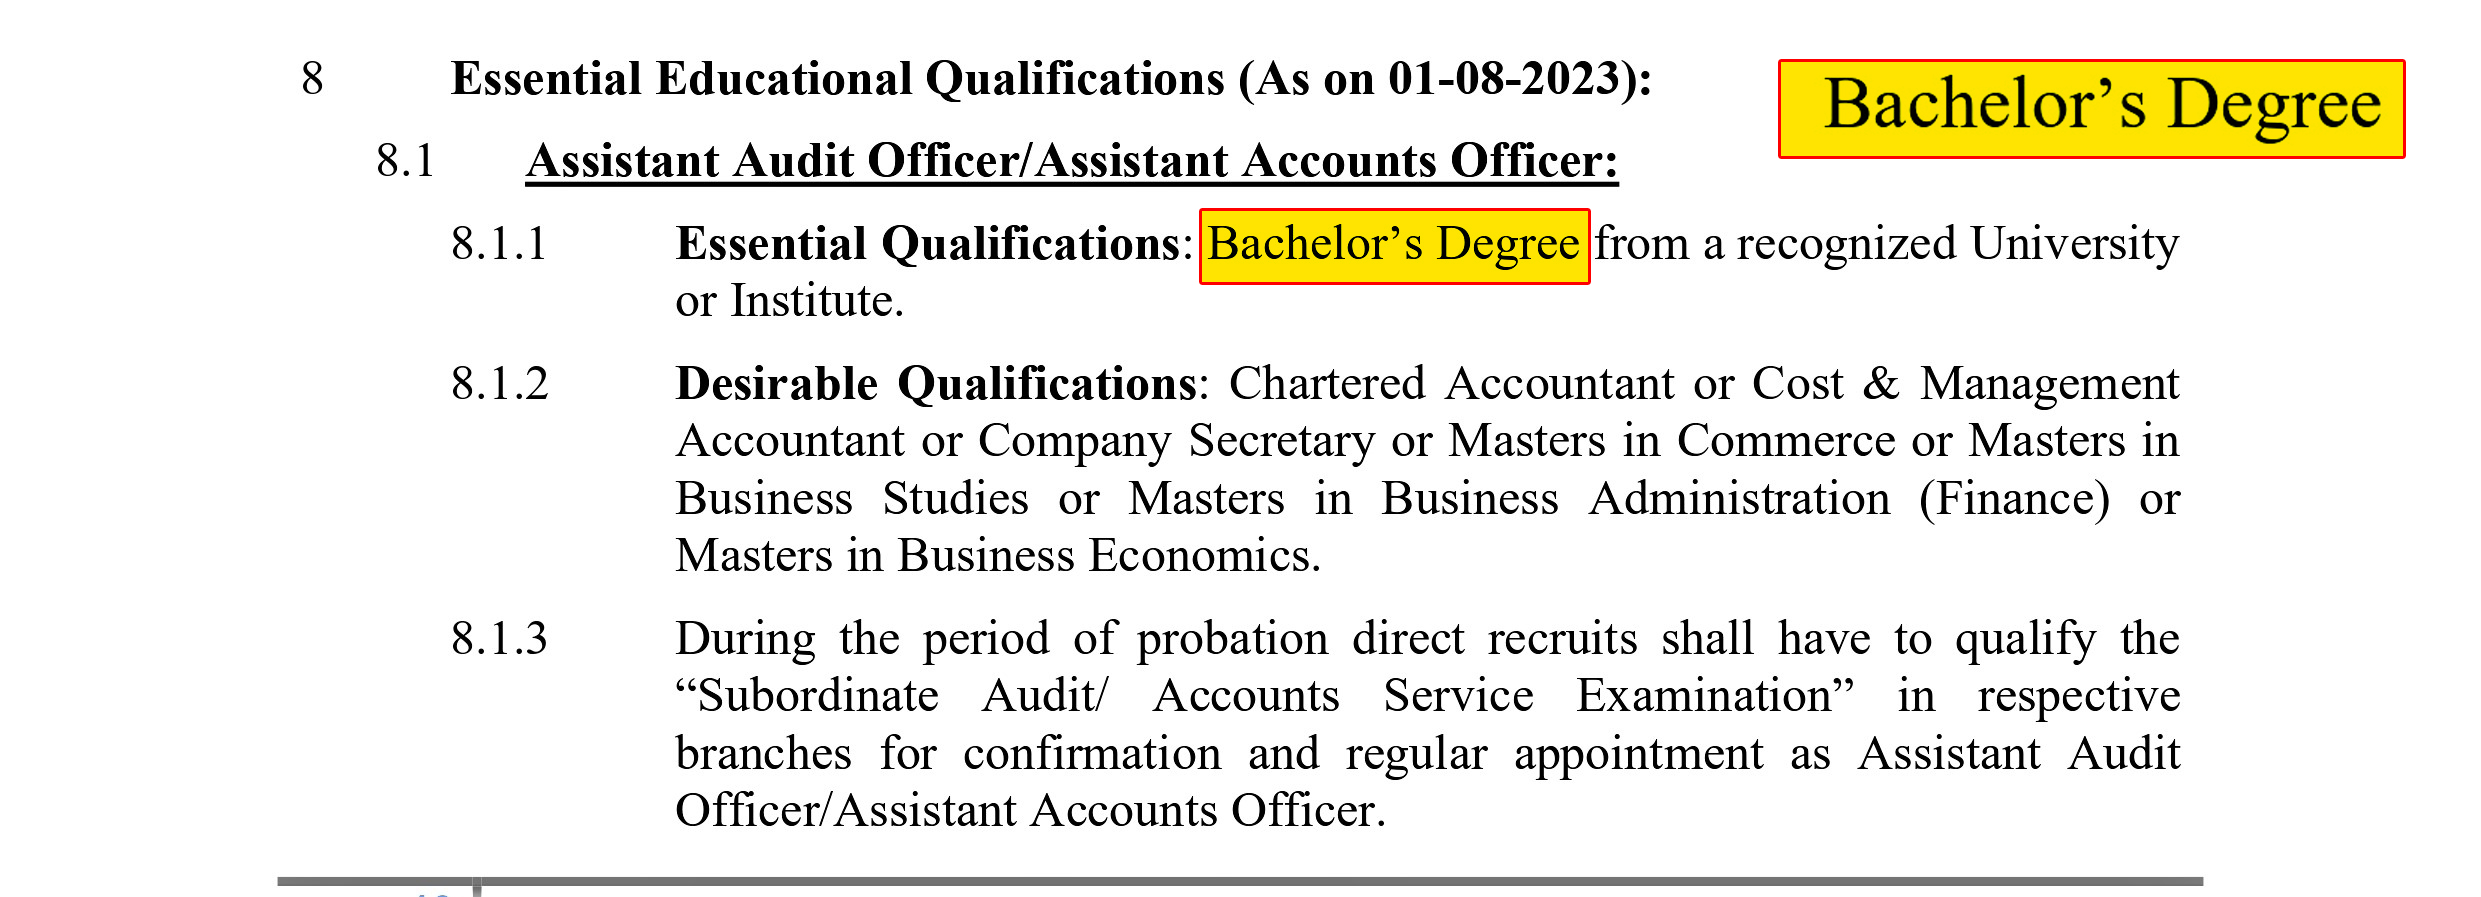 Staff Selection Commission (SSC) has announced the recruitment of Assistant Audit Officer & Assistant Accounts Officer